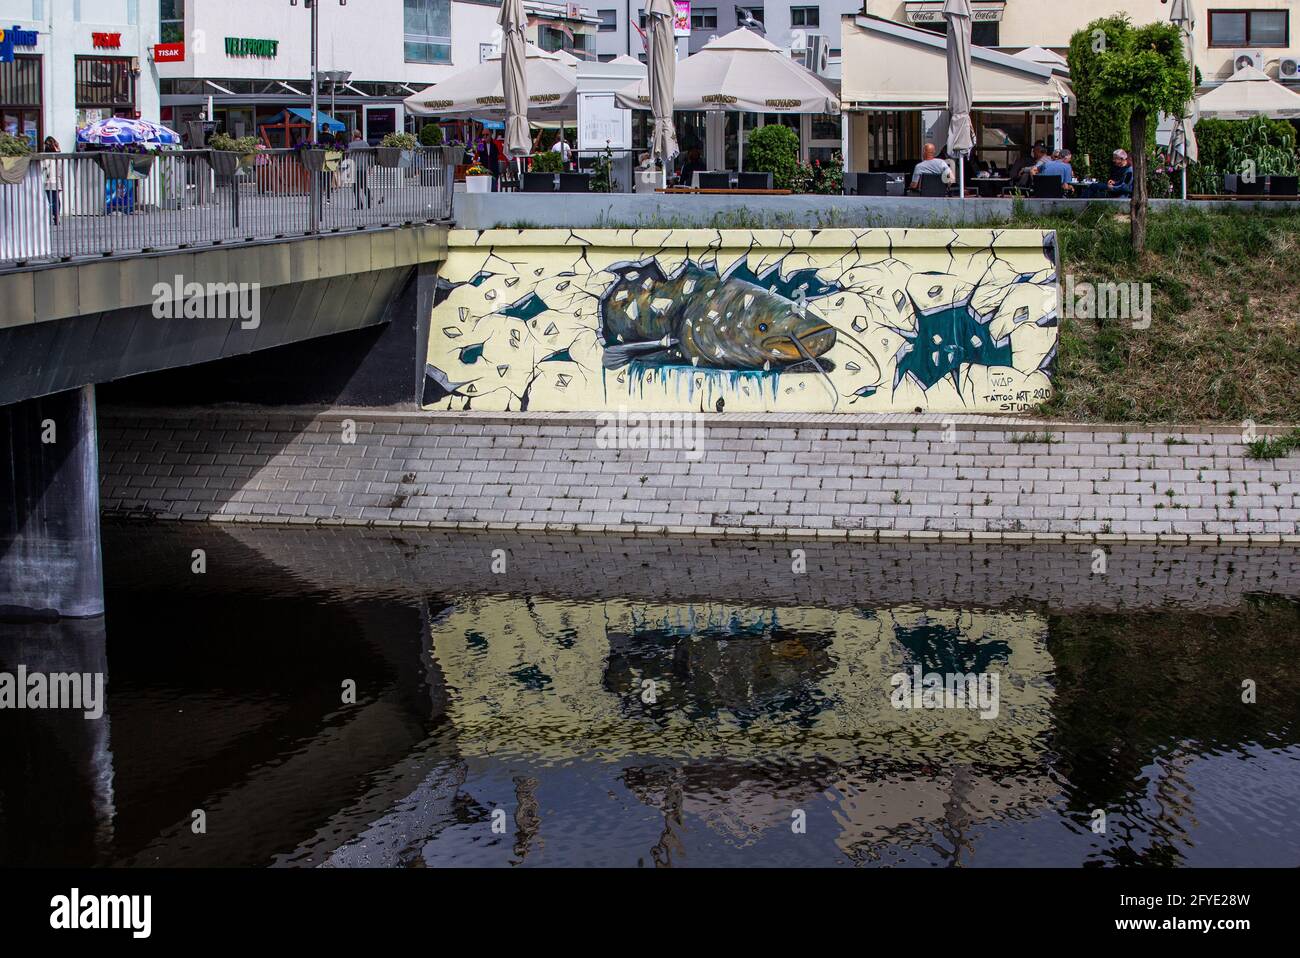 (210528) -- VUKOVAR, May 28, 2021 (Xinhua) -- A mural is seen on the river bank in Vukovar, Croatia, May 27, 2021. Street art festival VukovART, which features murals created by world-famous artists on the walls and sidewalks, is held in Vukovar for the fifth year in a row. (Davor Javorovic/Pixsell via Xinhua) Stock Photo